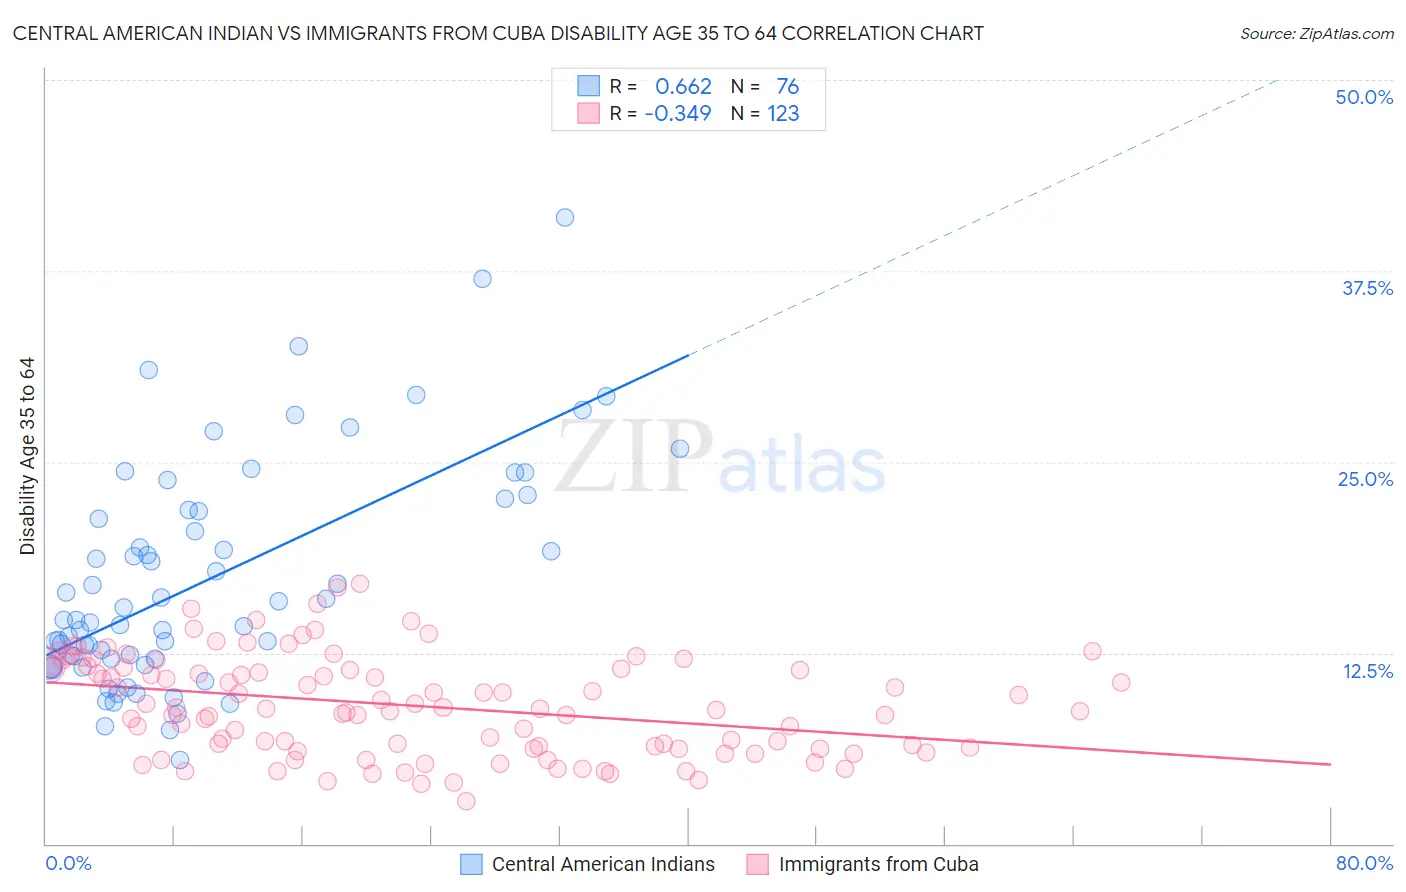 Central American Indian vs Immigrants from Cuba Disability Age 35 to 64